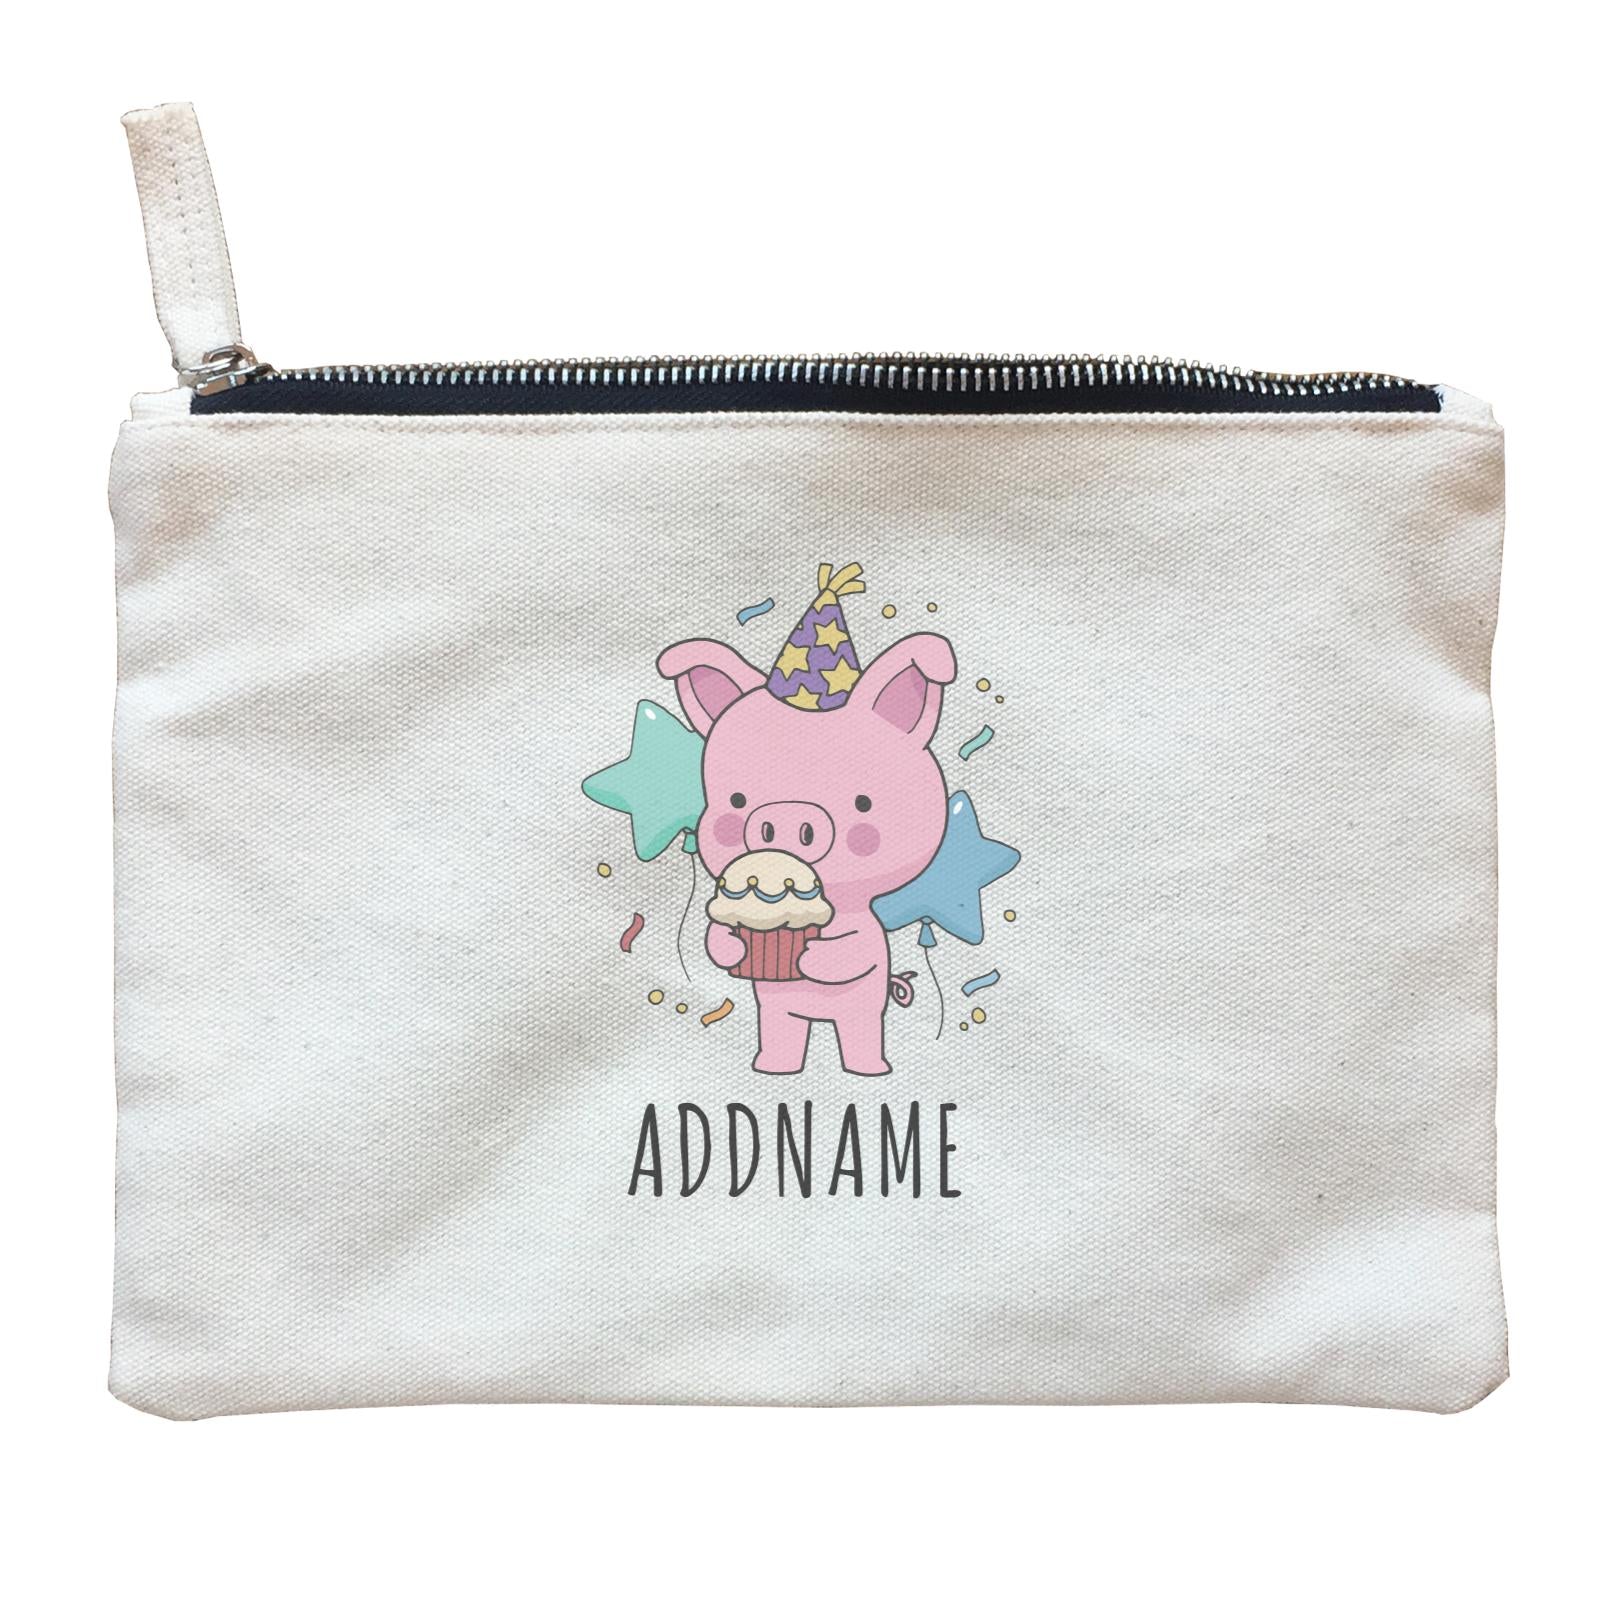 Birthday Sketch Animals Pig with Party Hat Eating Cupcake Addname Zipper Pouch